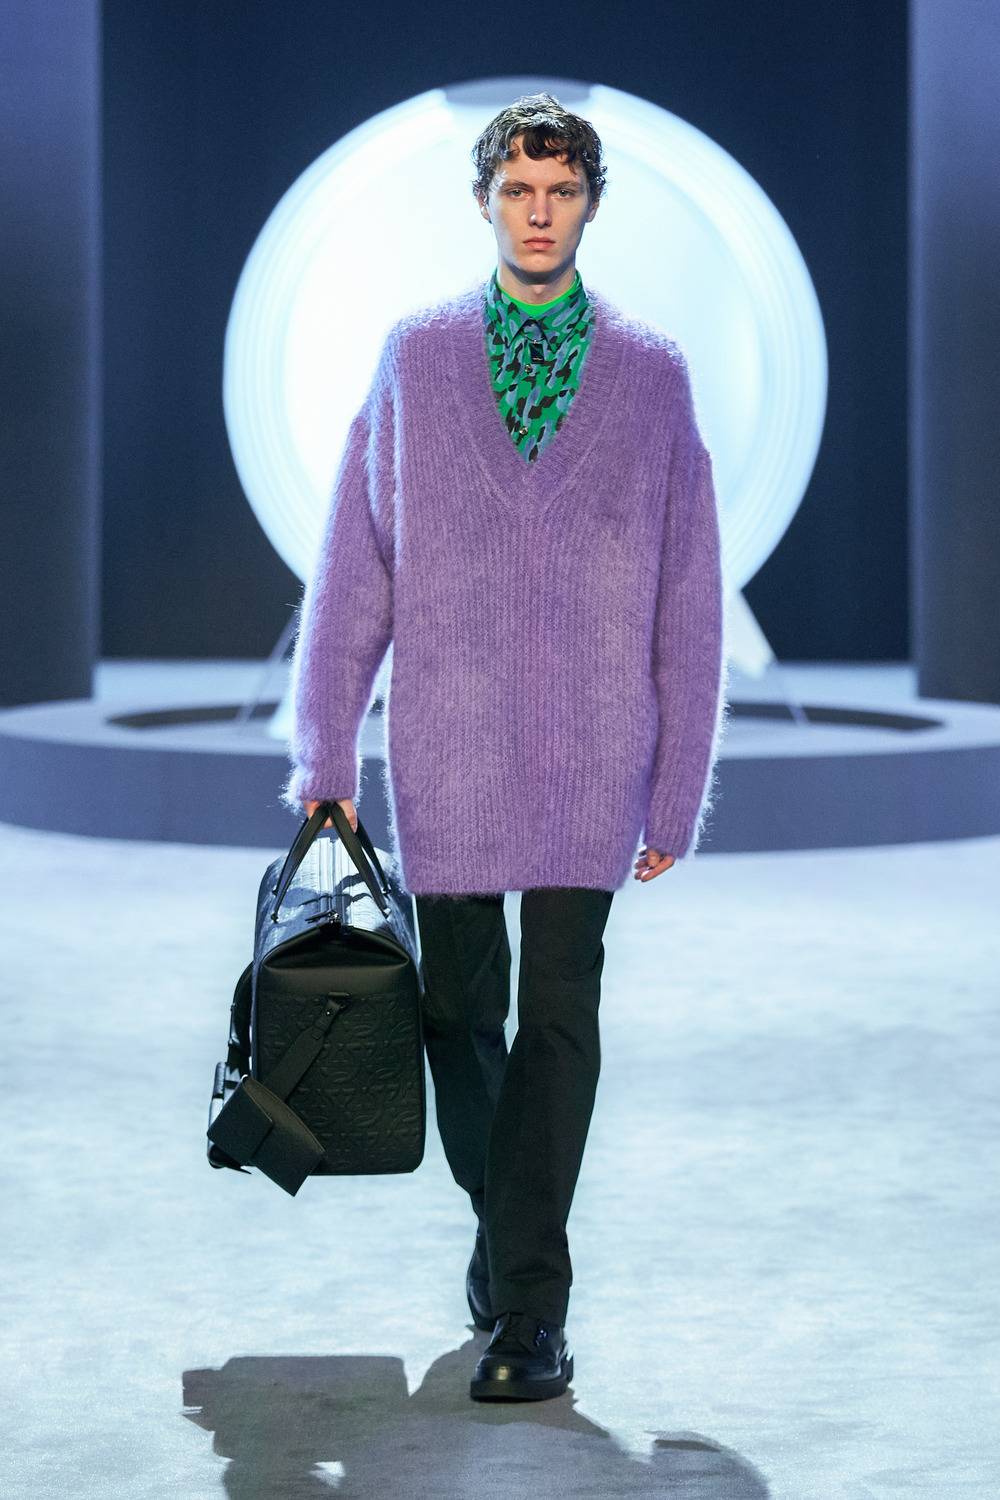 Salvatore Ferragamo reveals an astonishing Fall-Winter 2021-2022 collection with a science-fiction theme